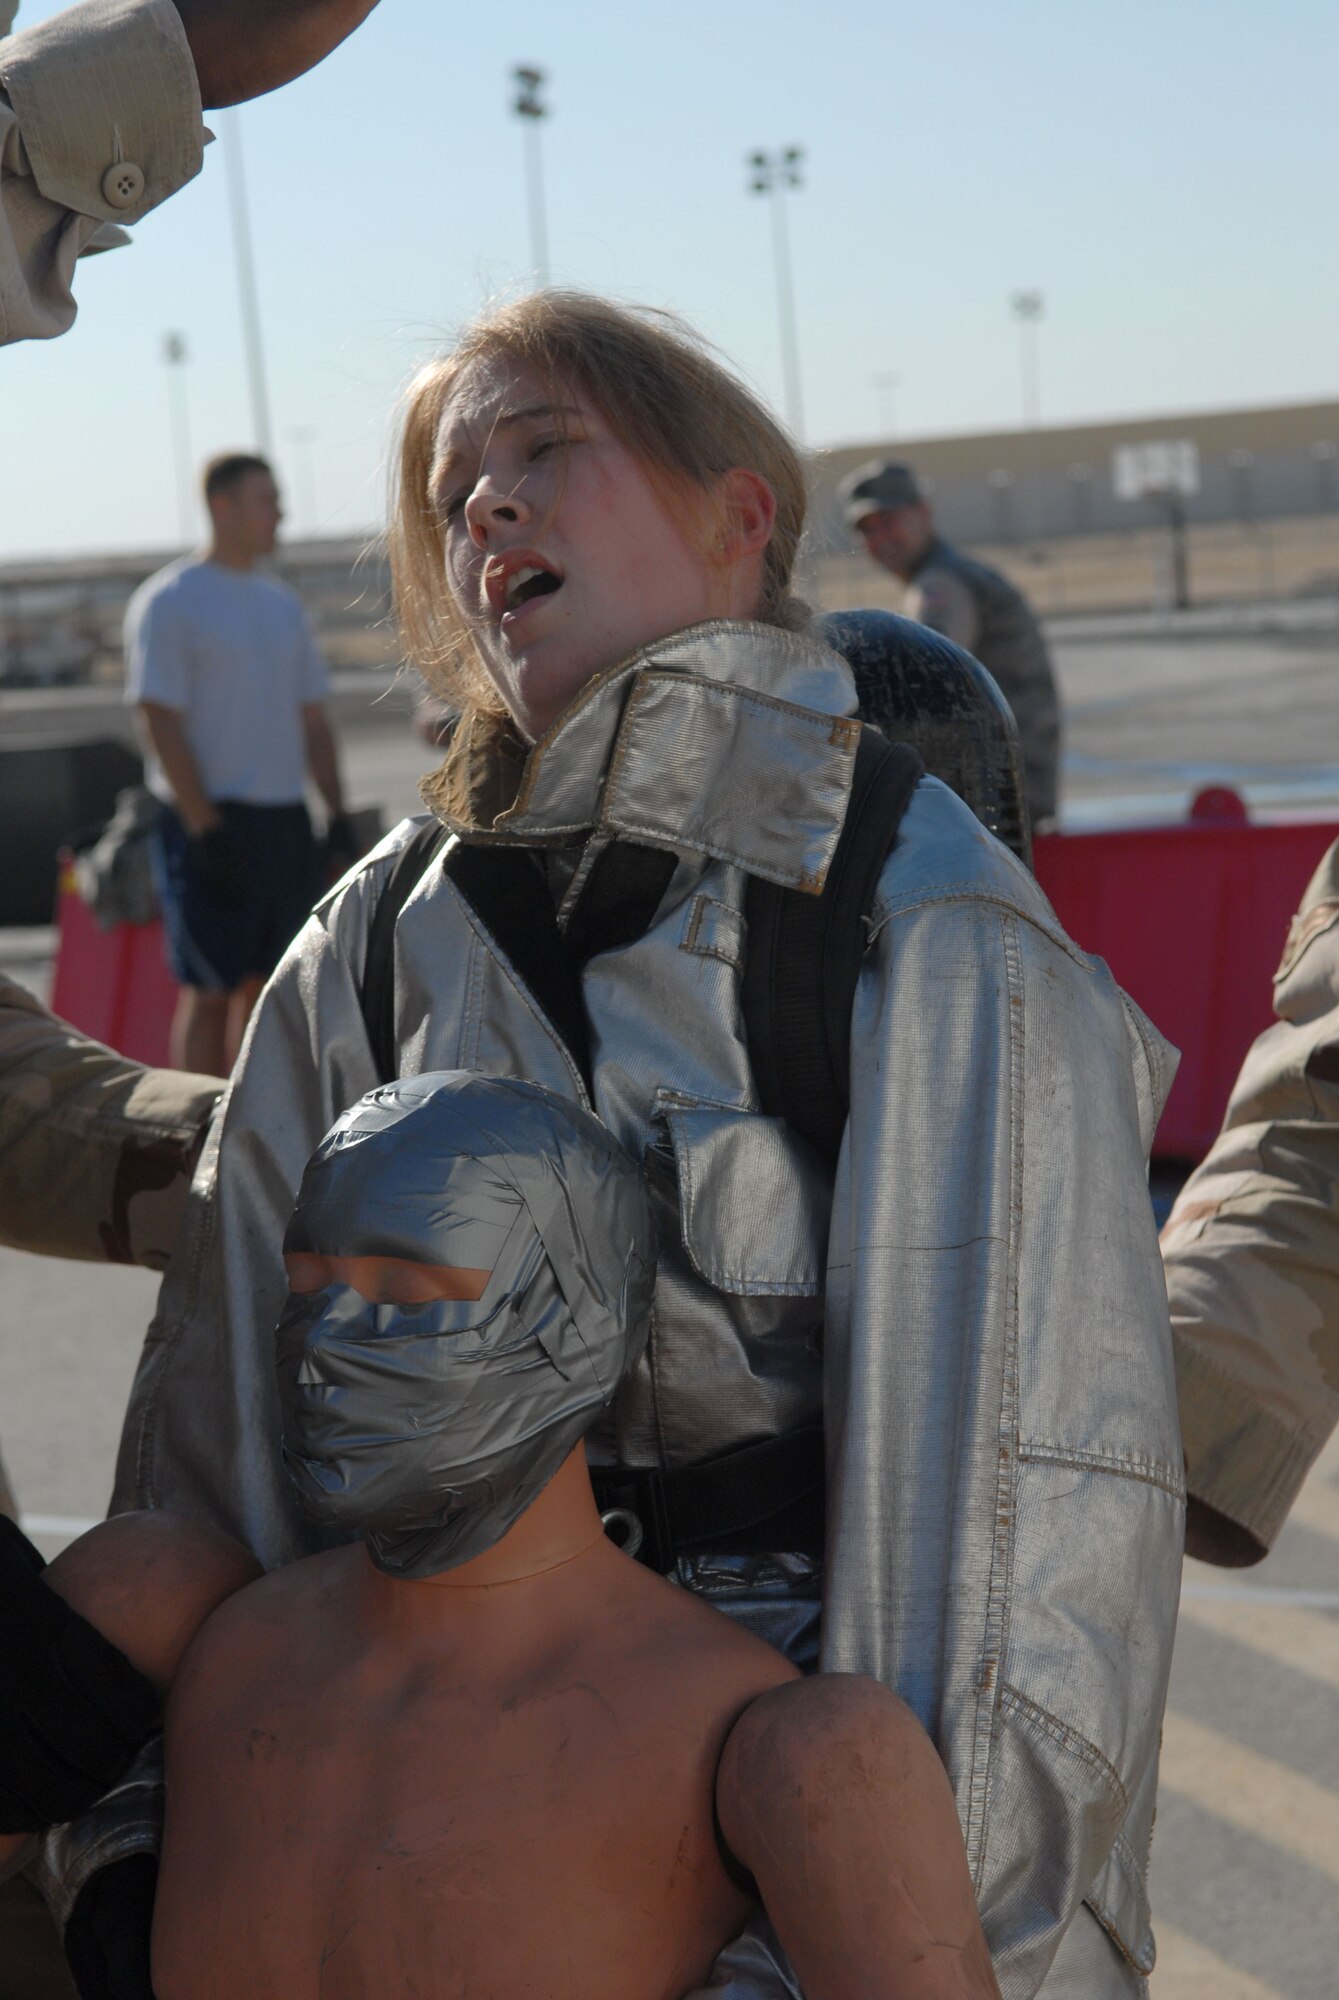 SOUTHWEST ASIA -- Airman 1st class Amanda Boehne, 380th Expeditionary Force Support Squadron, carries a mannequin weighing about 100 pounds in the Firefighter Challenge here Dec. 20. The 380th Expeditionary Civil Engineer Fire and Emergency Services Flight hosted the event to provide insight on the mental and physical challenges firefighters face in daily training and emergency responses. Airman Boehne, an Air National Guard member who calls Waconia, Minn., home, is deployed from the 133rd Airlift Wing, Minneapolis, Minn. (U.S. Air Force photo by Tech. Sgt. Denise Johnson) (released)